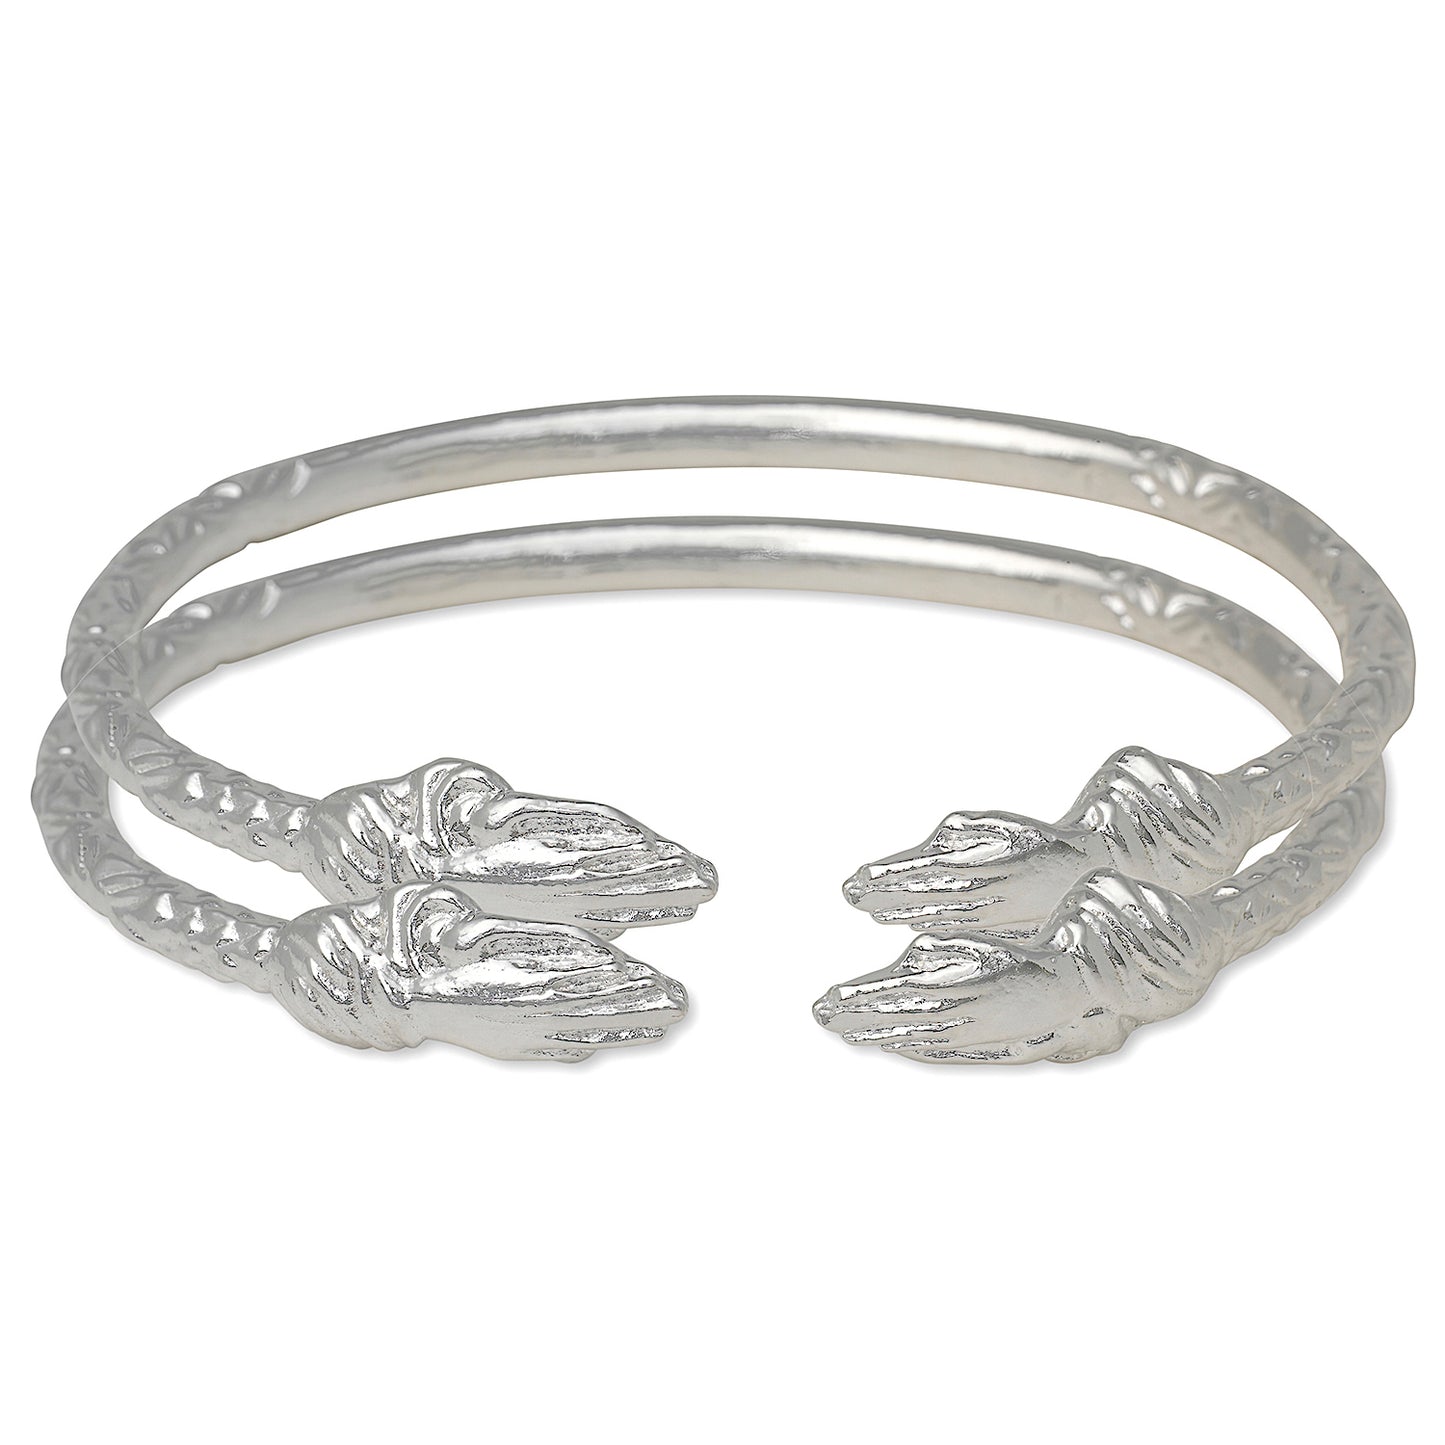 Better Jewelry Praying Hands Ends West Indian Bangles .925 Sterling Silver (Pair)